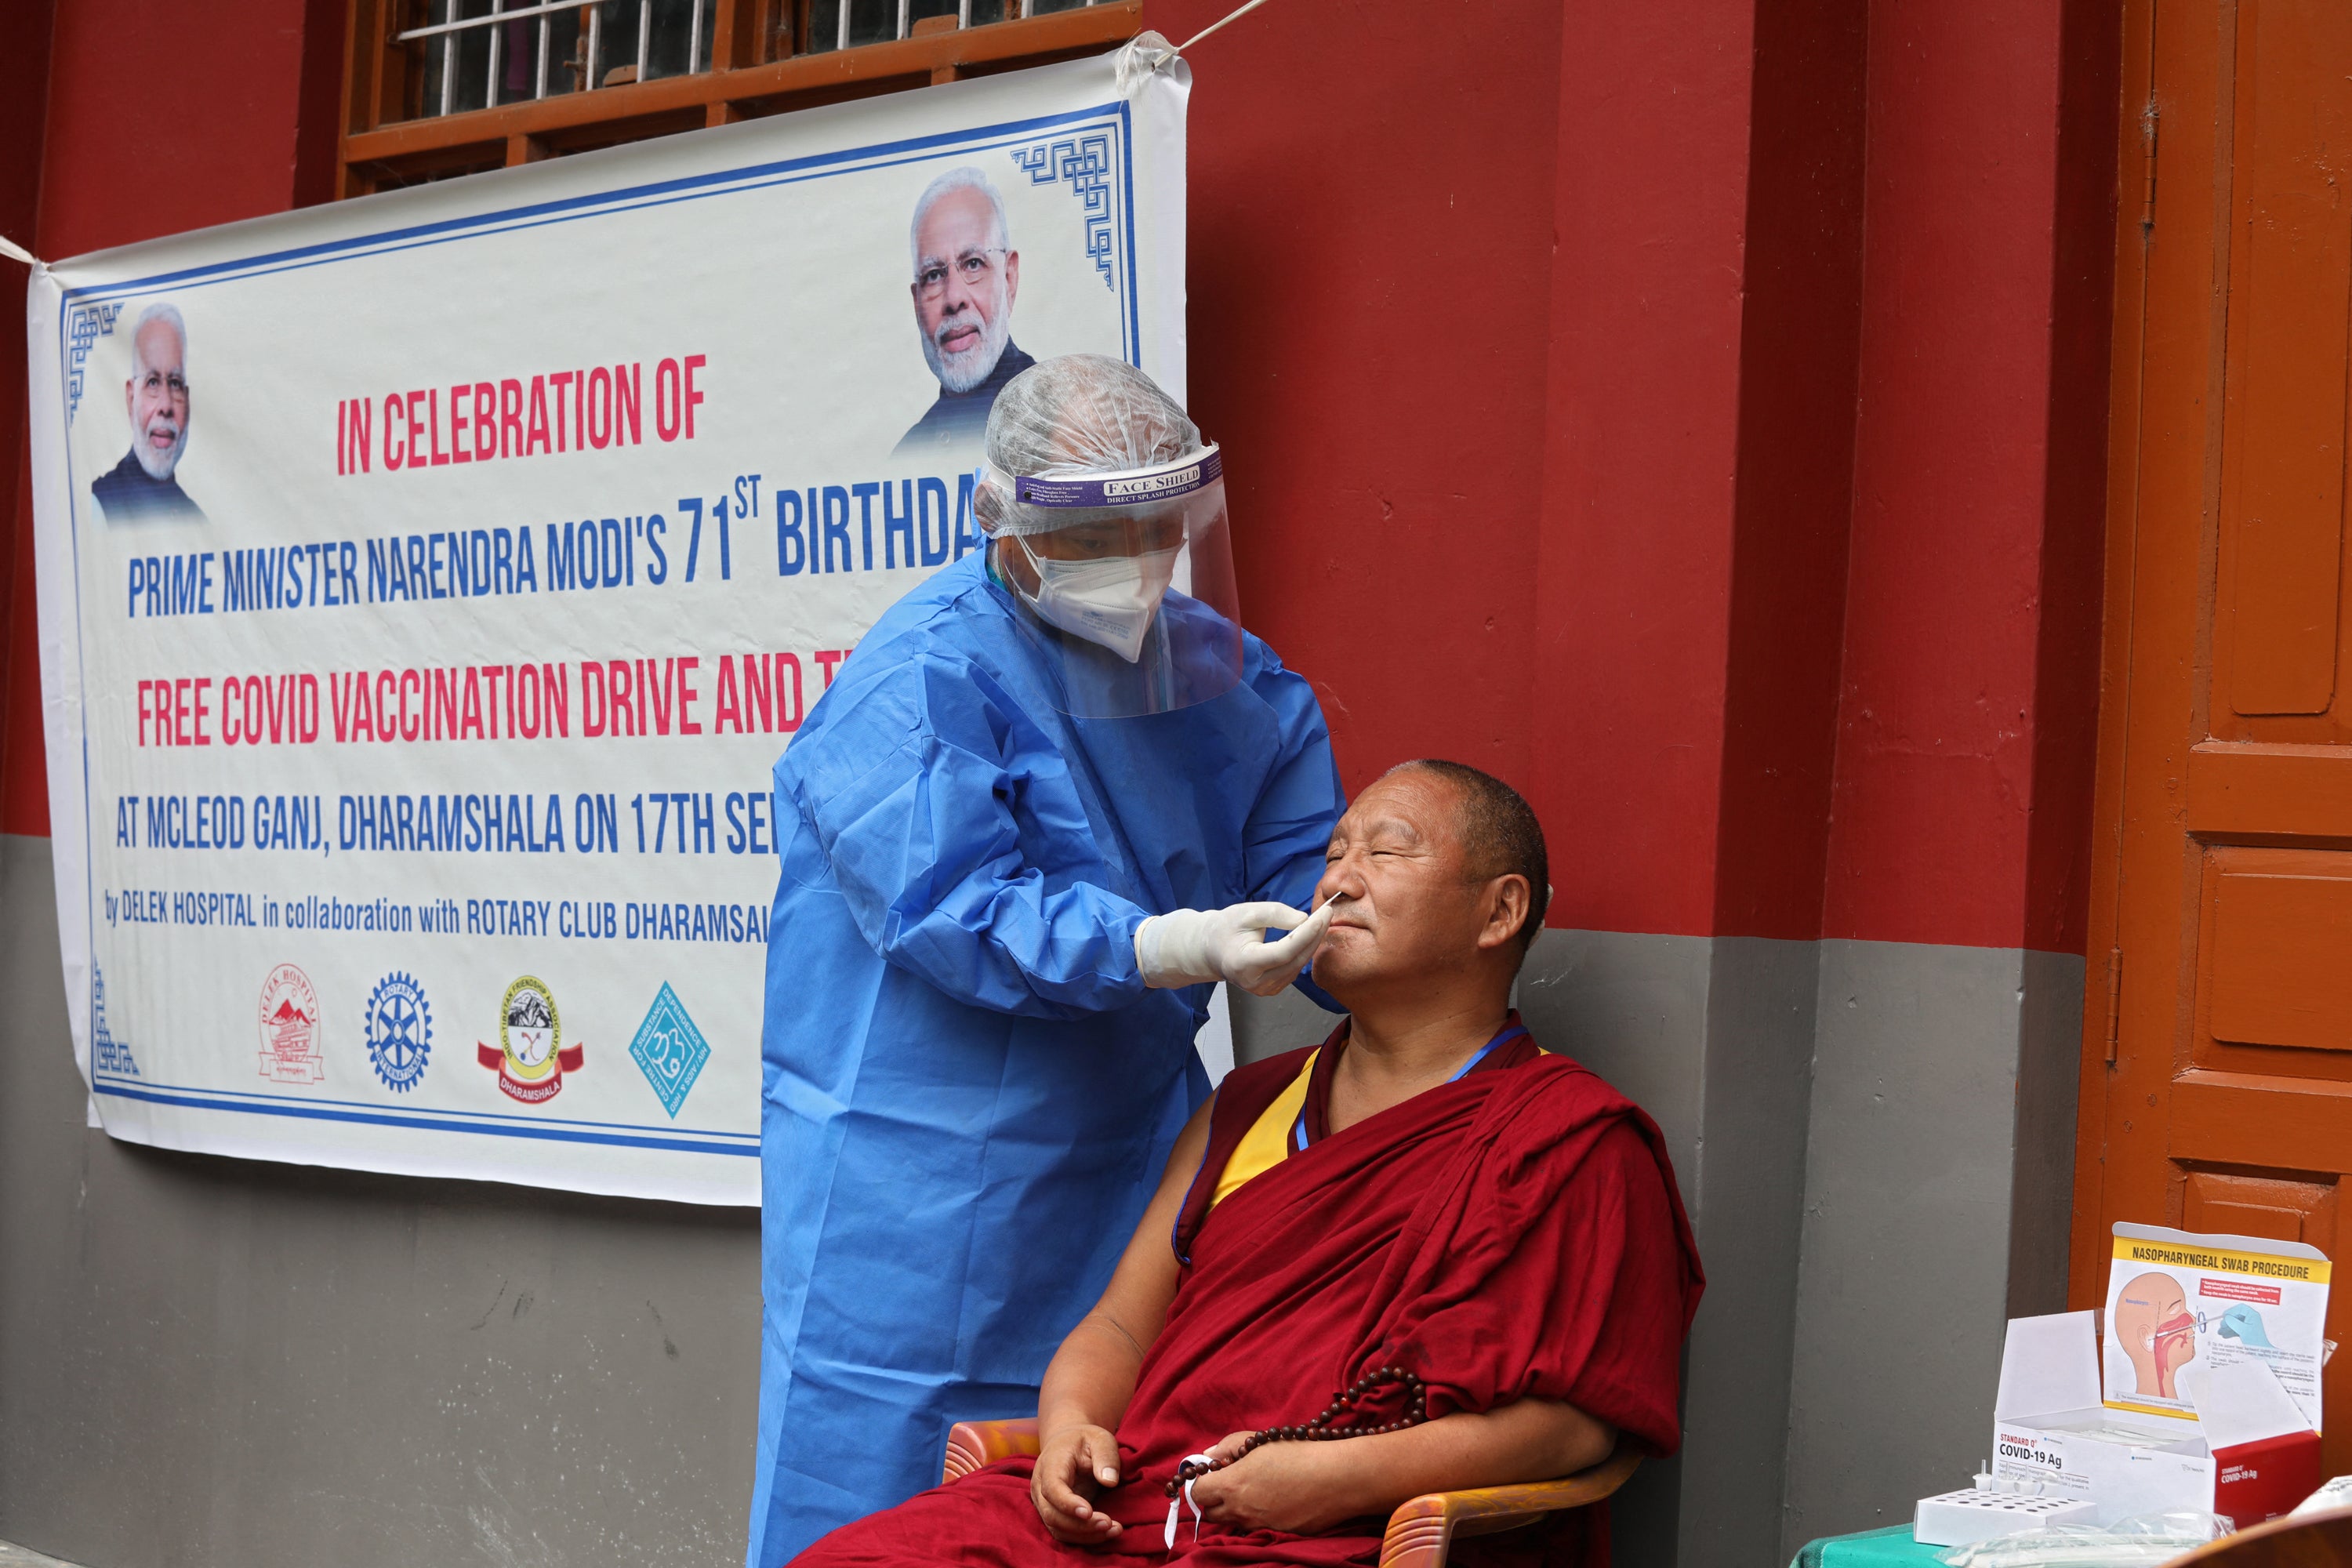 A health worker takes a nasal swab sample from a Tibetan monk in India at a free Covid vaccination and testing drive organised to mark Indian prime minister Narendra Modi’s 71st birthday